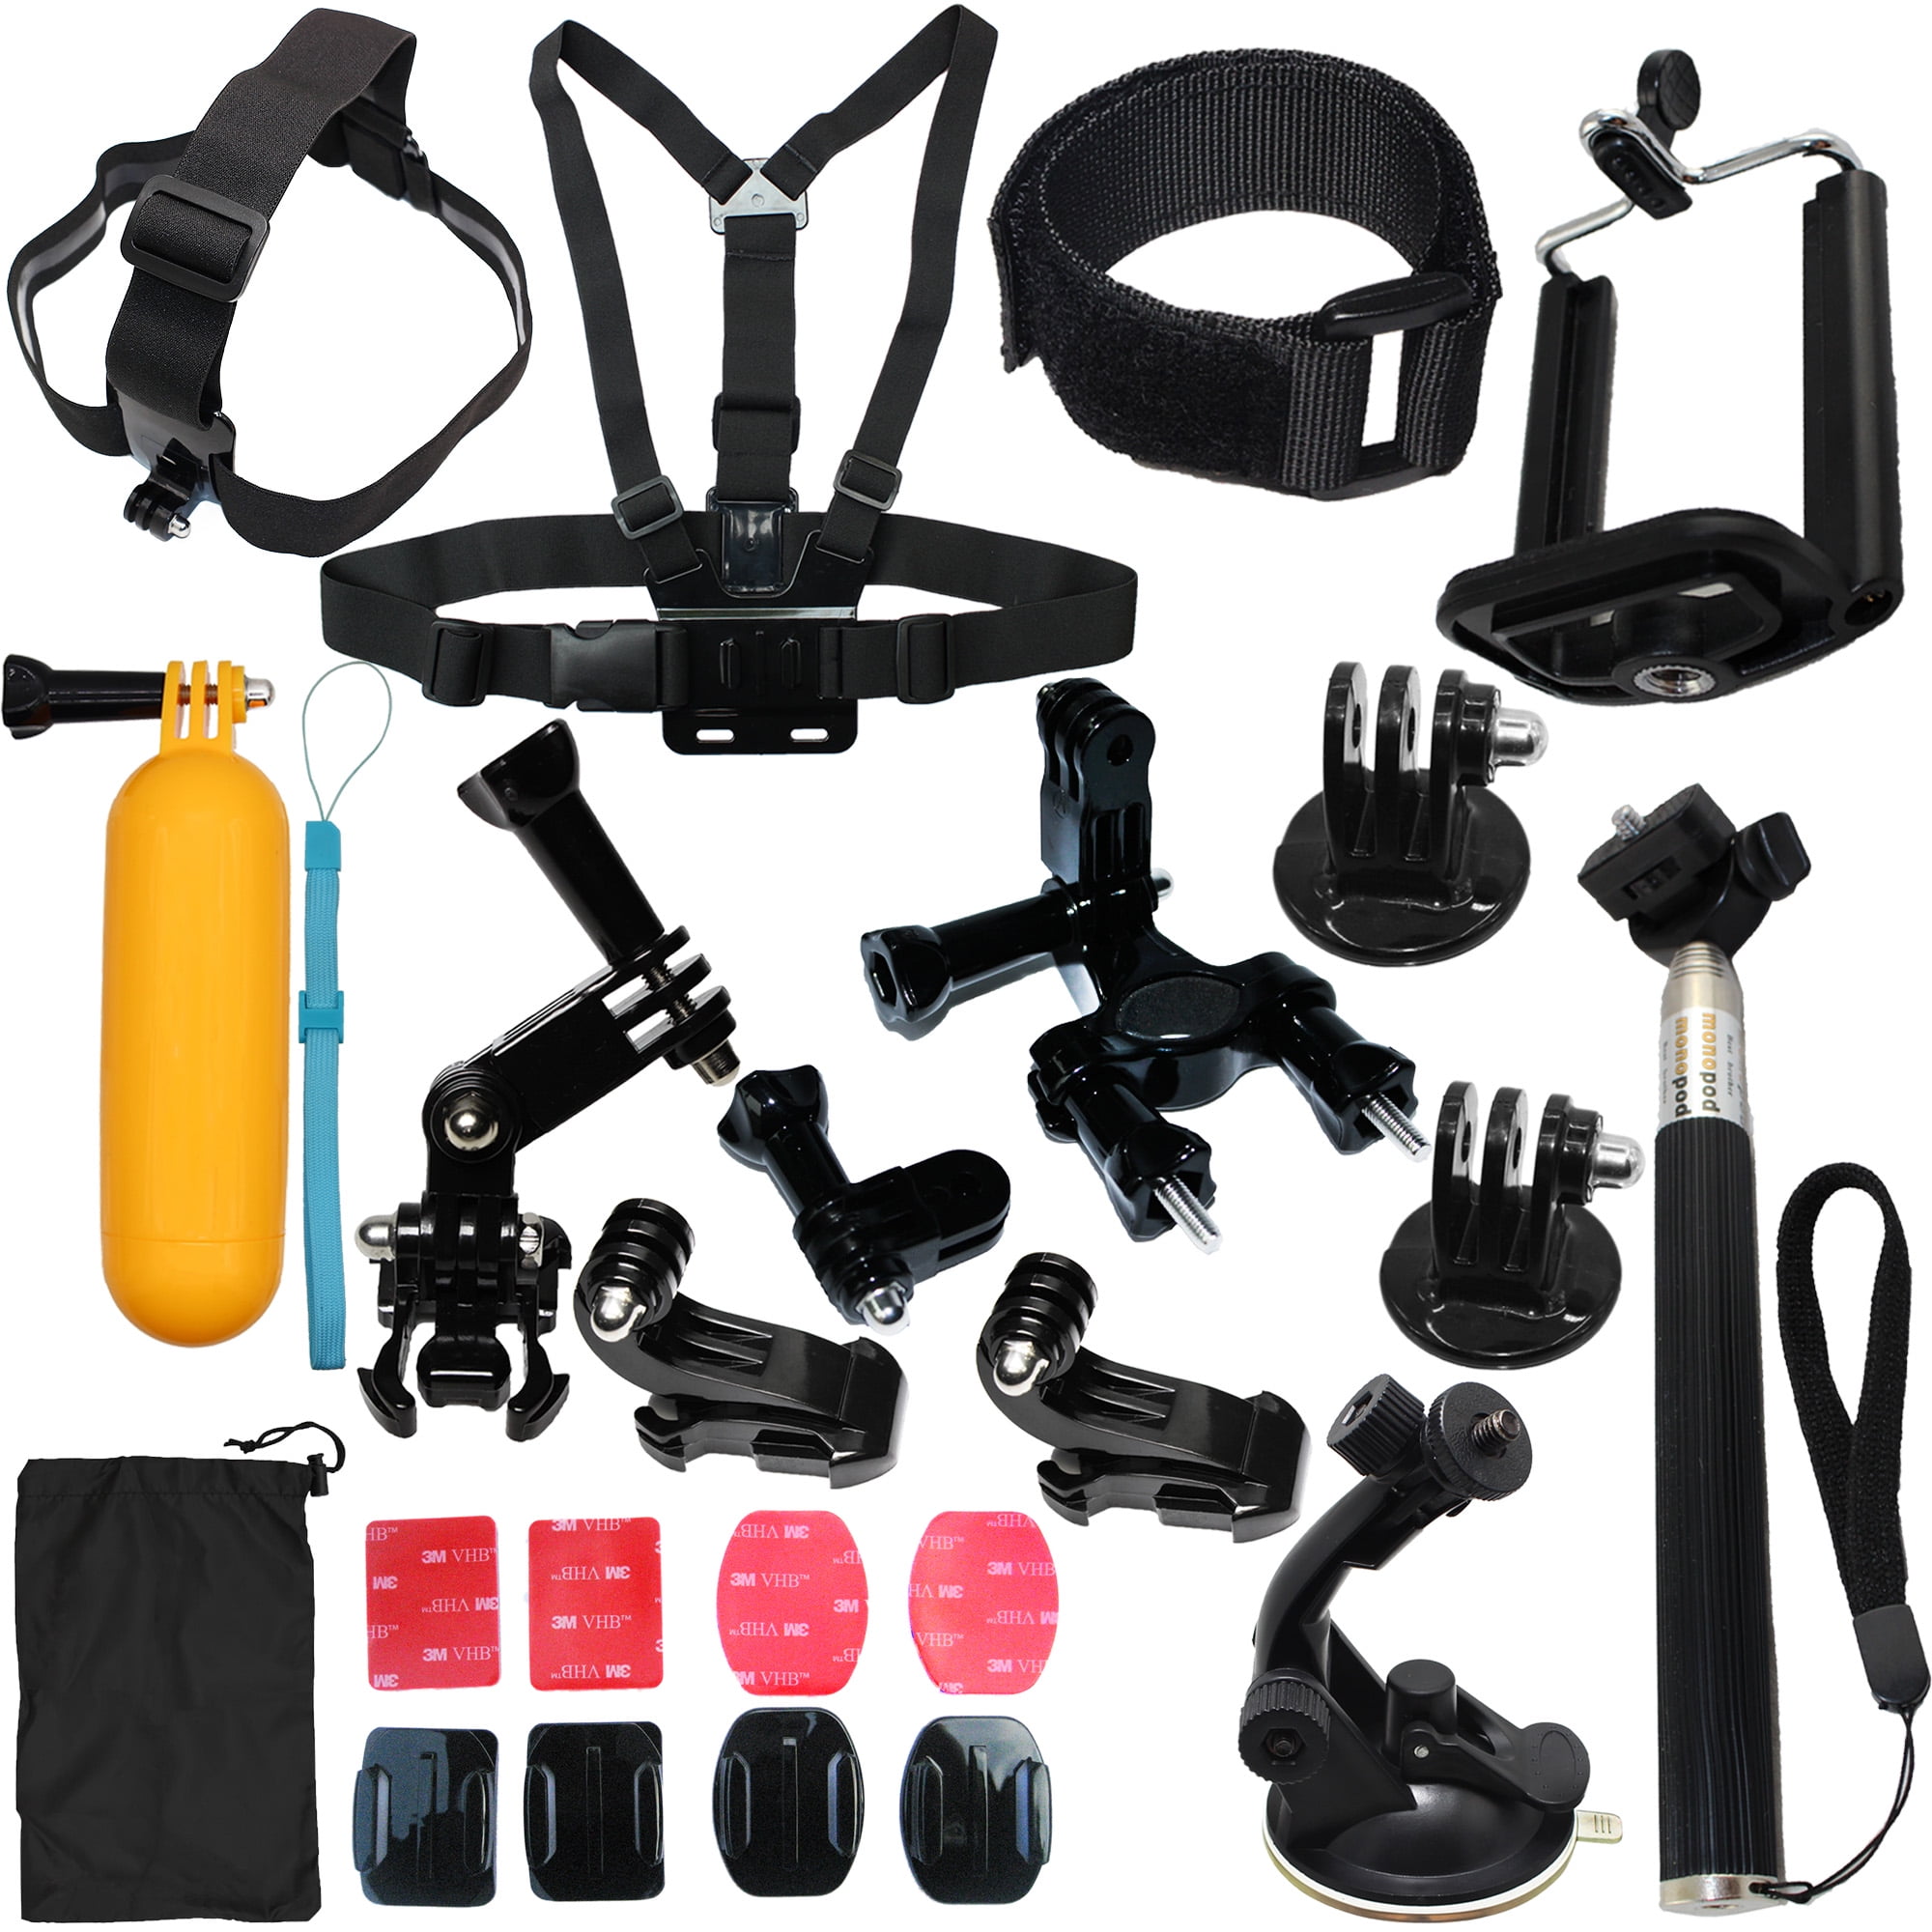 Head Strap Chest Strap Hand Band Mount kit Compatible with Gopro Hero 6/5/Session/4/3/2/HD Original Black Silver Cameras 